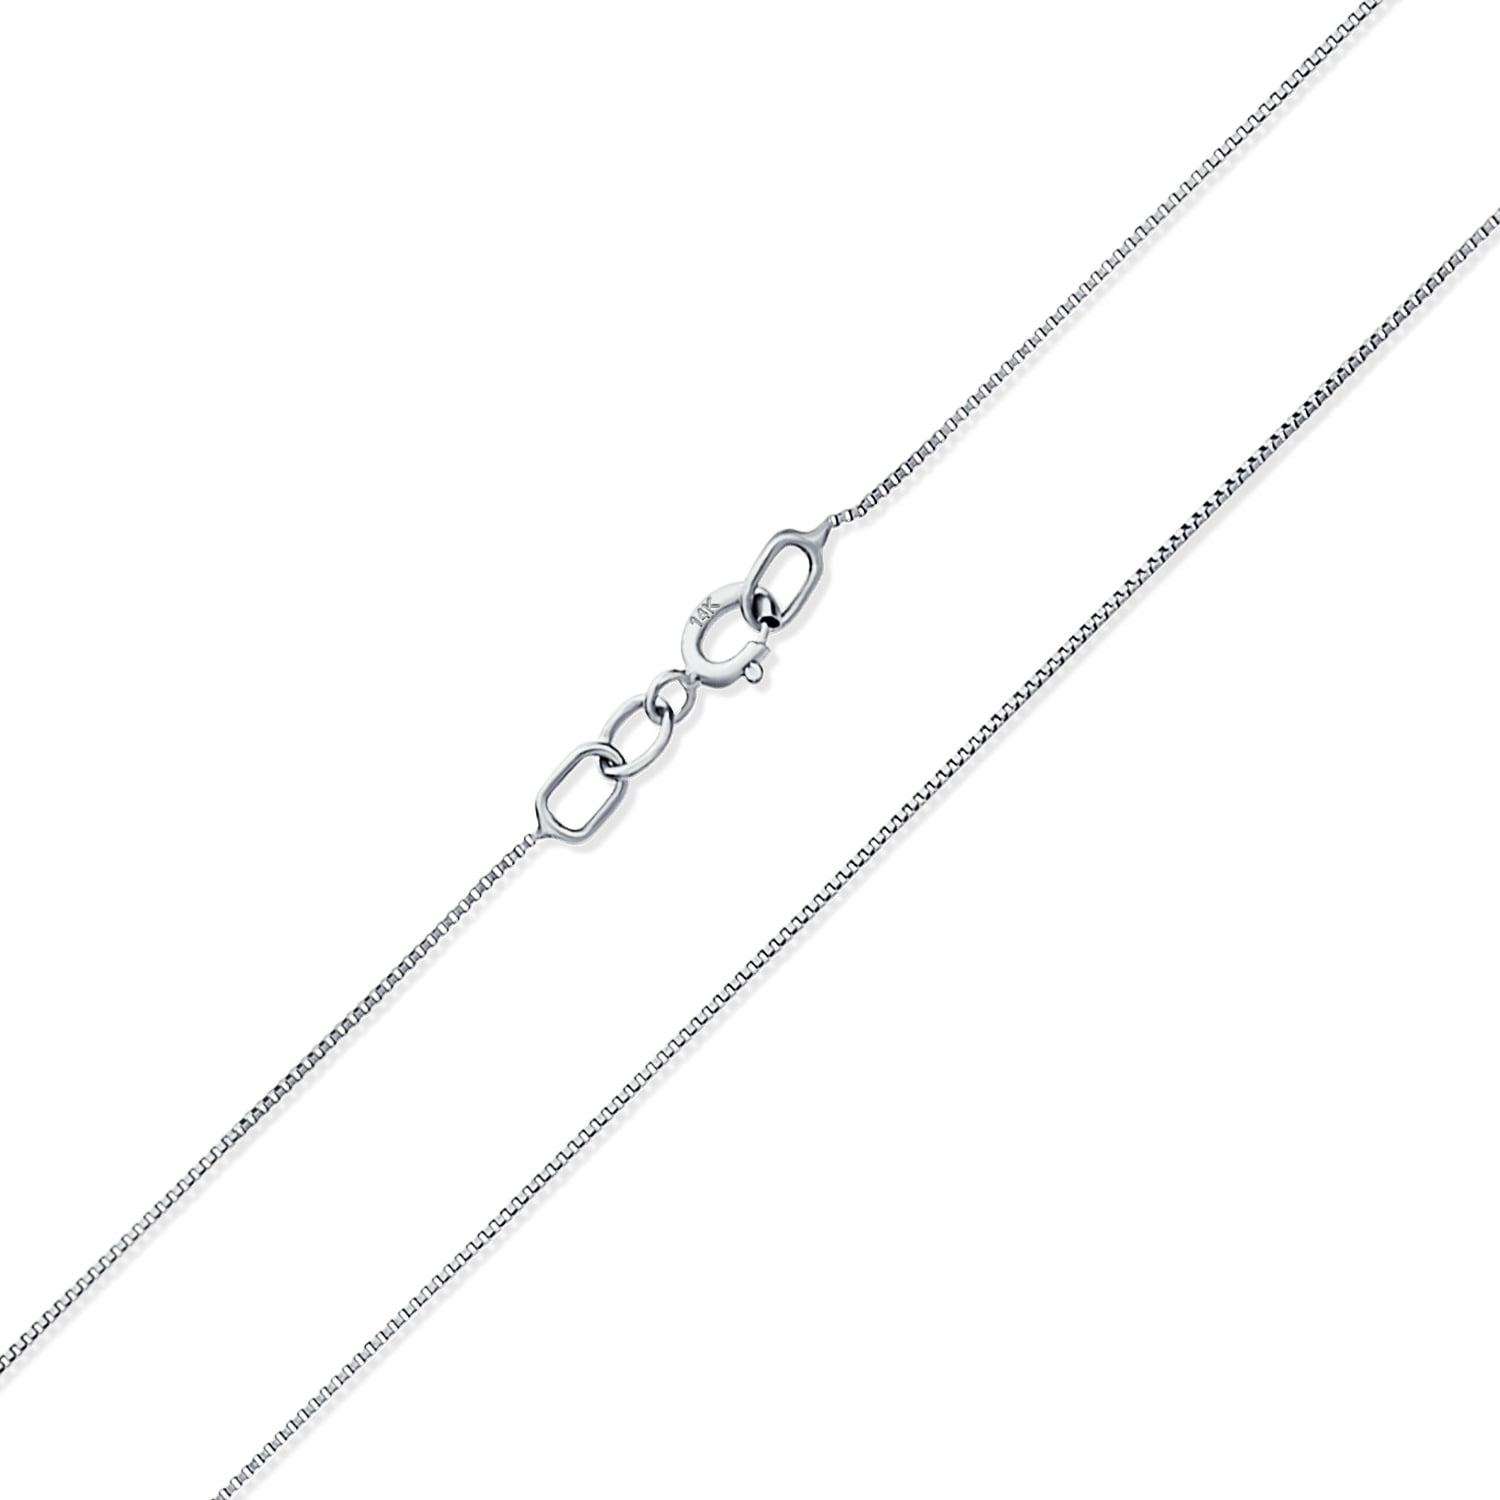 Solid 14K White Gold Box Chain Necklace Delicate Dainty Necklace